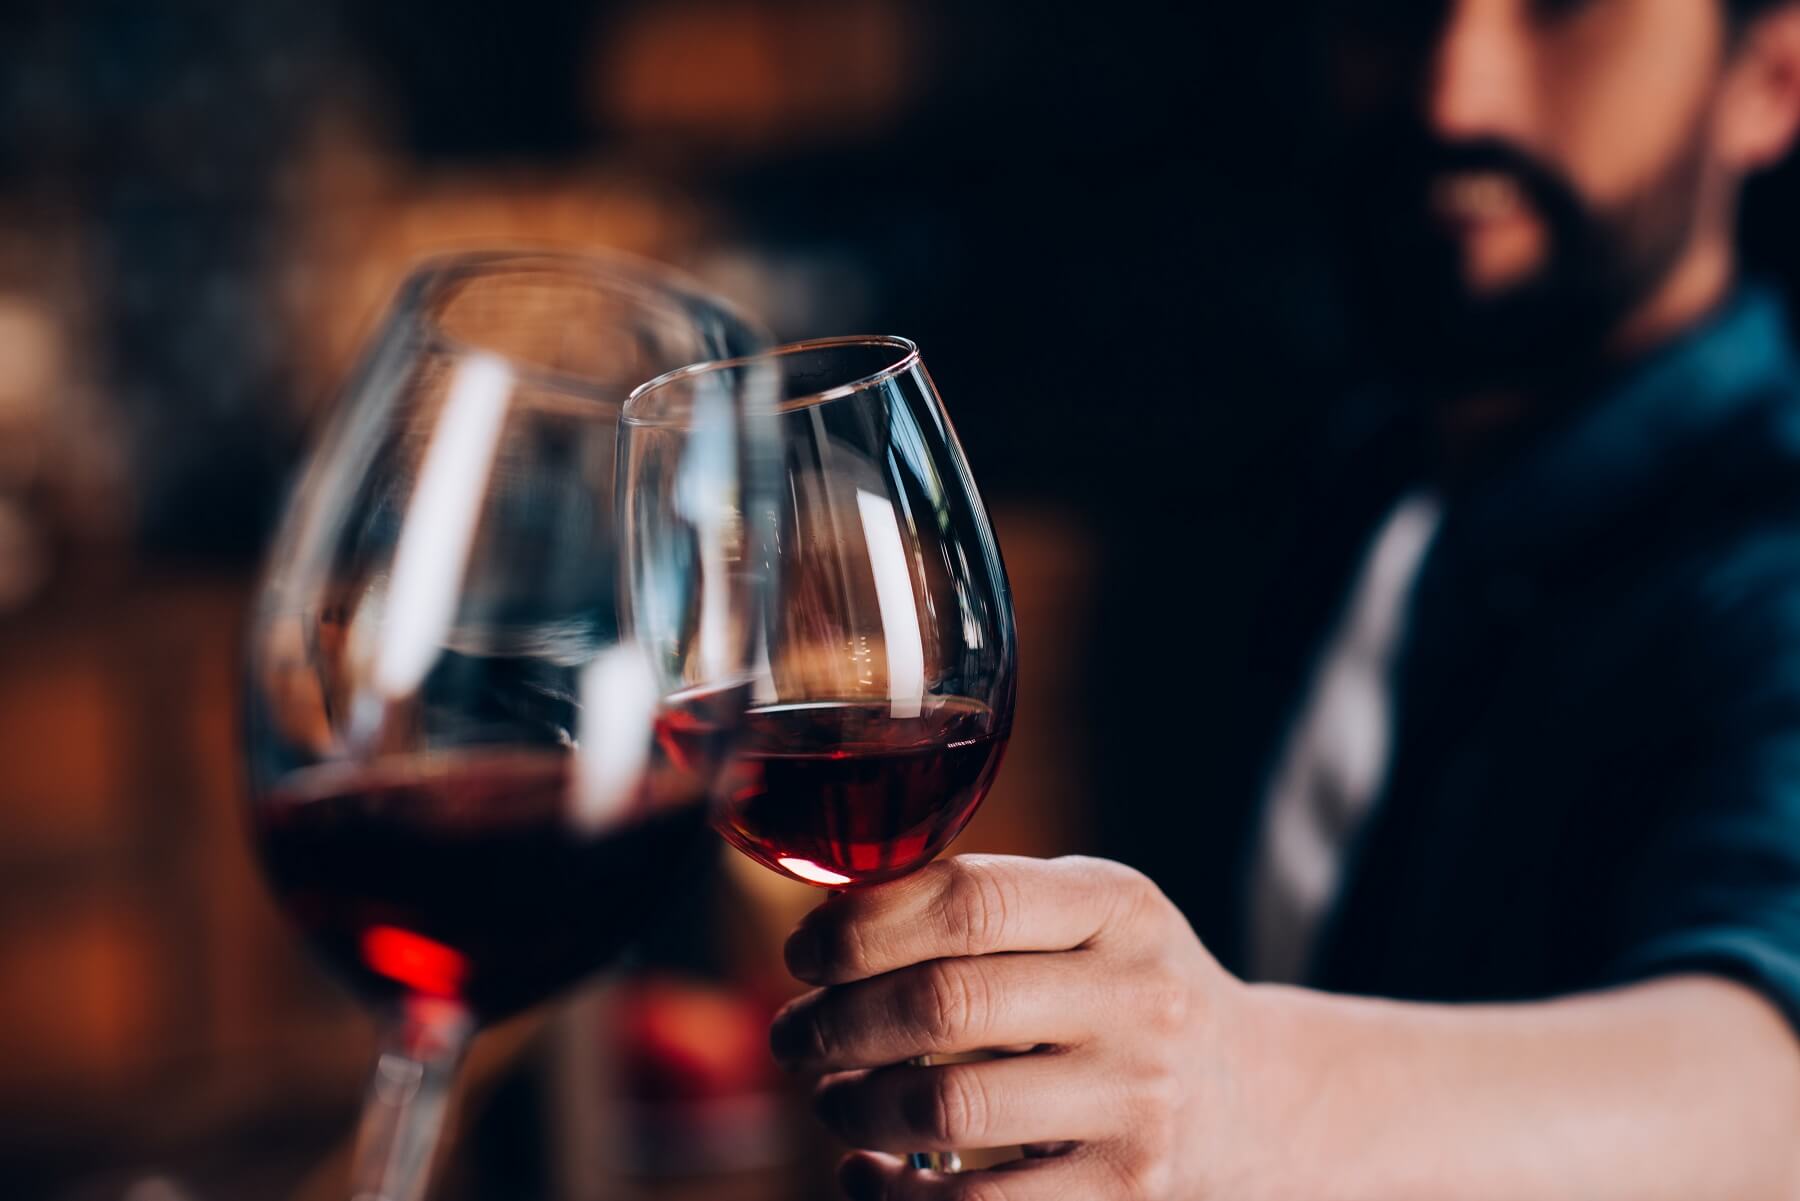 Does wine really make you live longer and better? We summarise the major studies to get to the bottom on what we currently know.